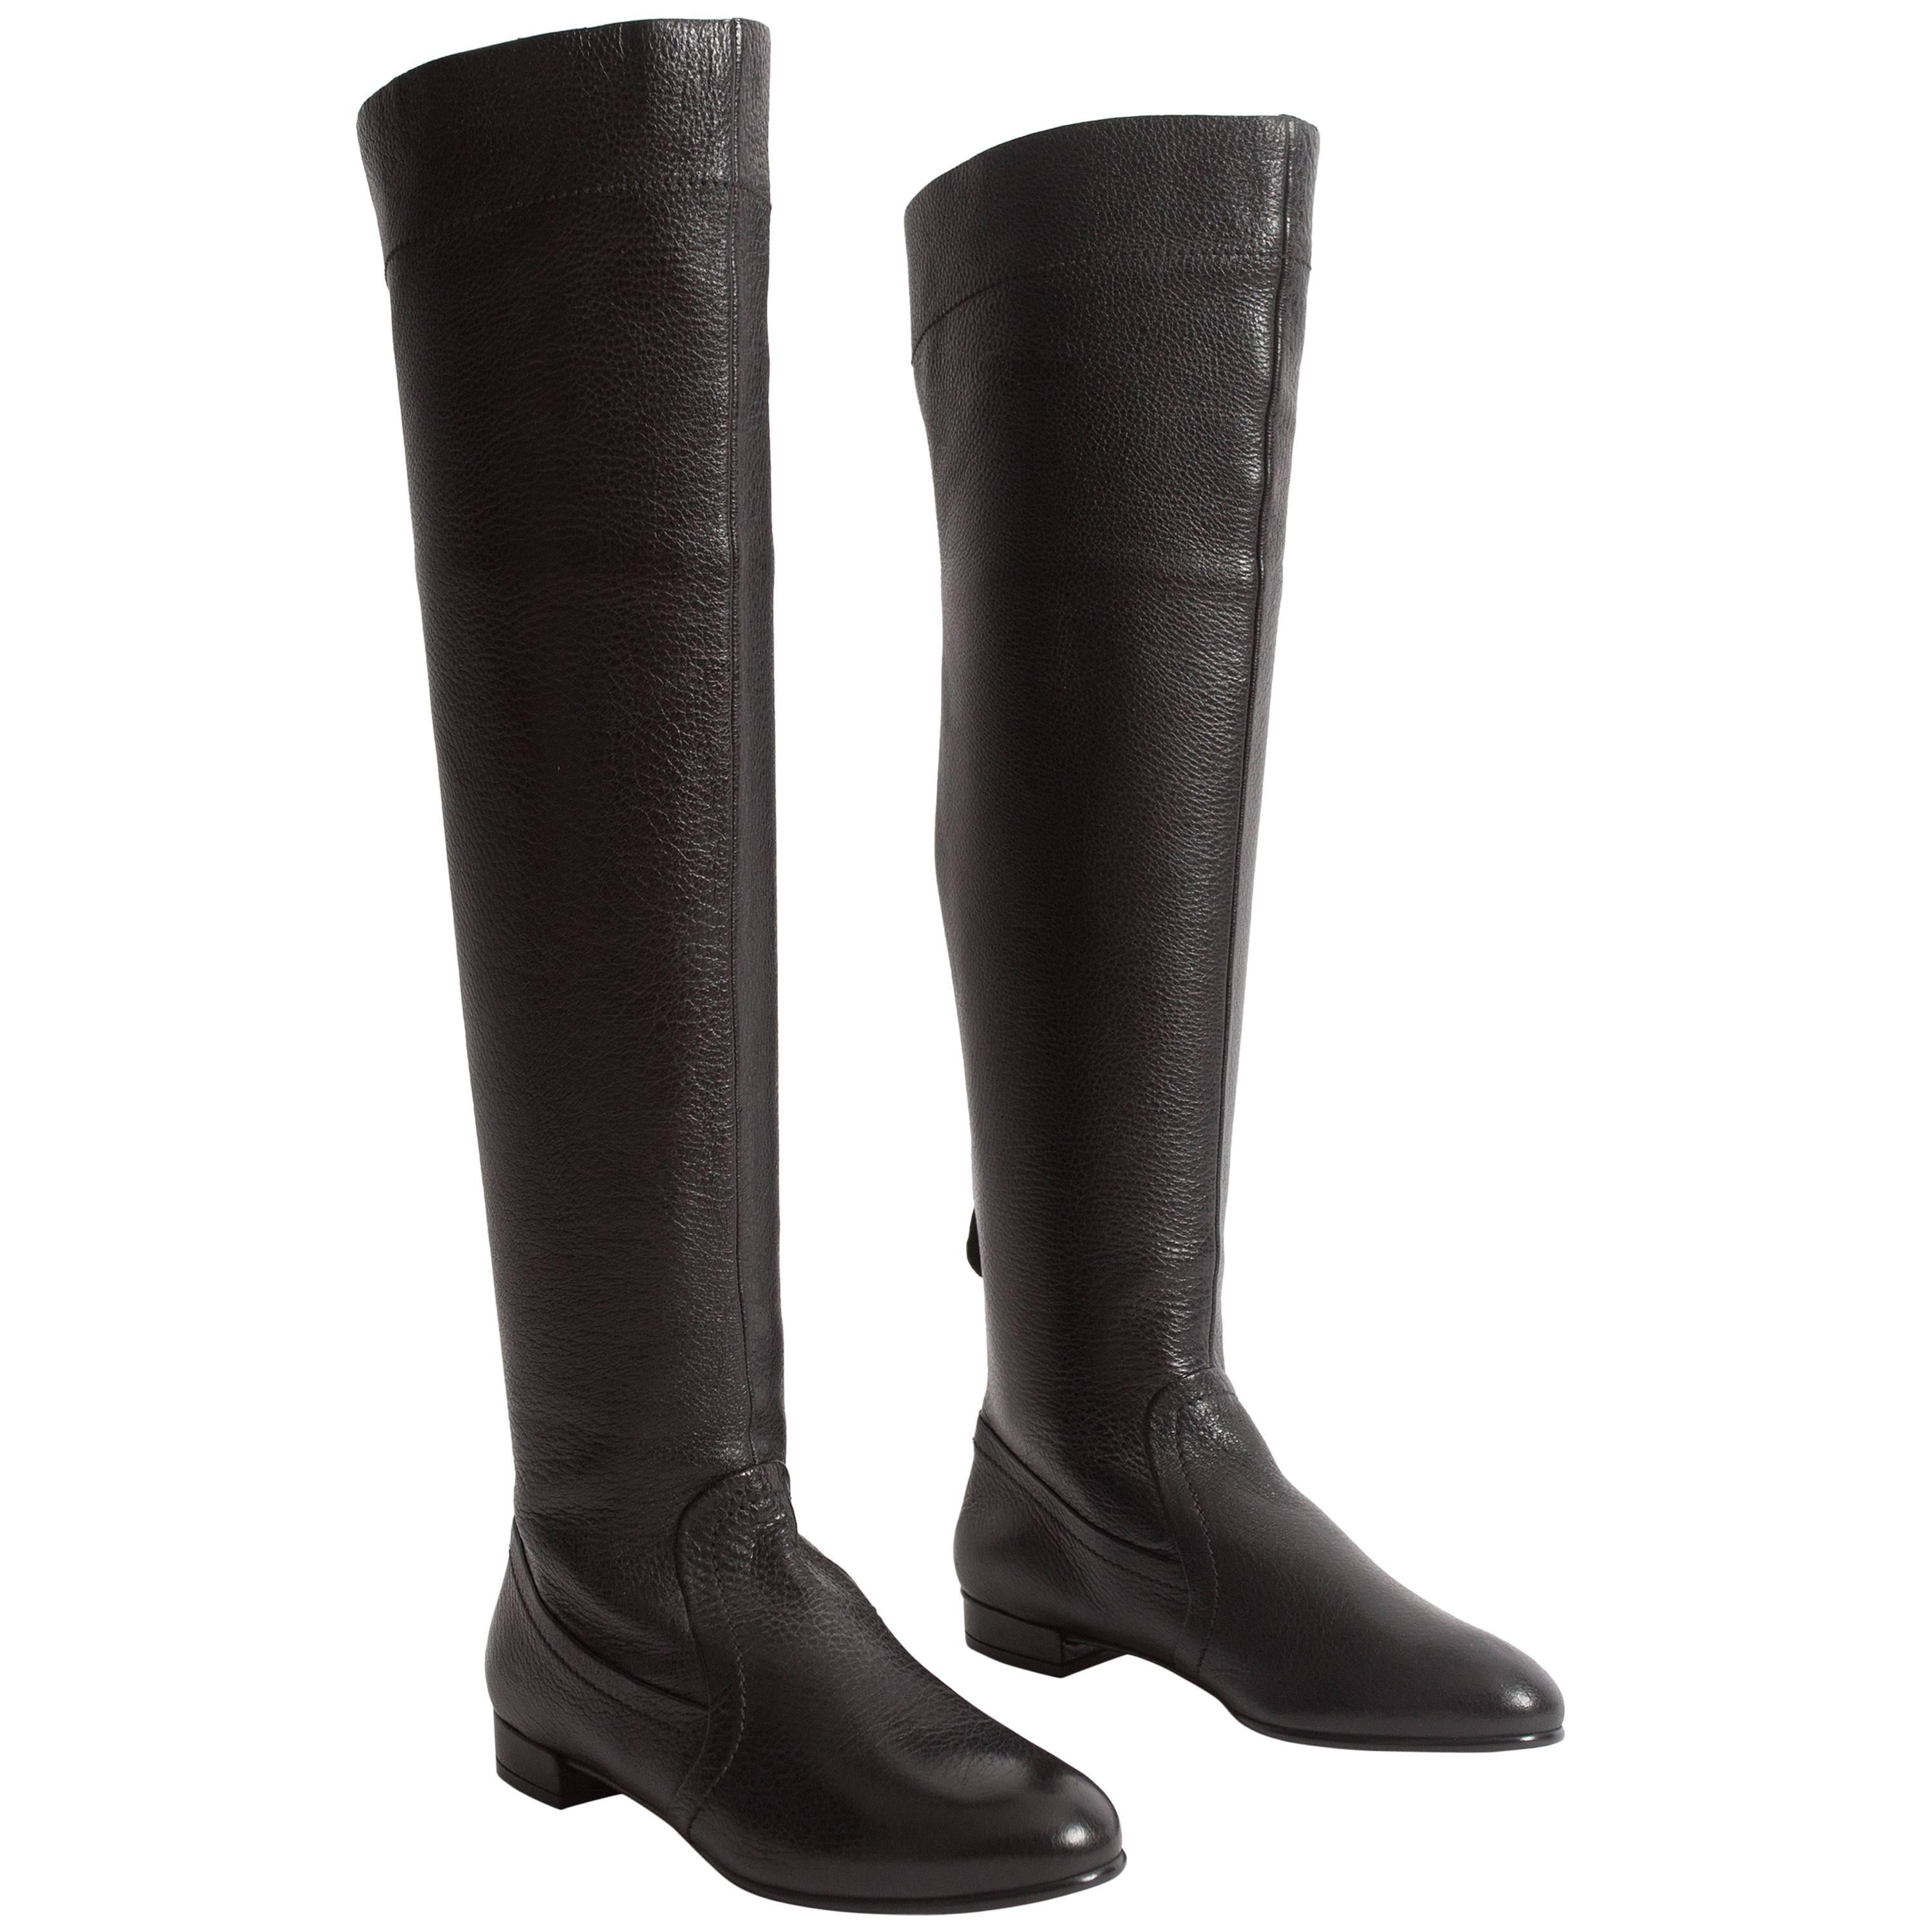 Alaia black leather riding boots, size 37.5